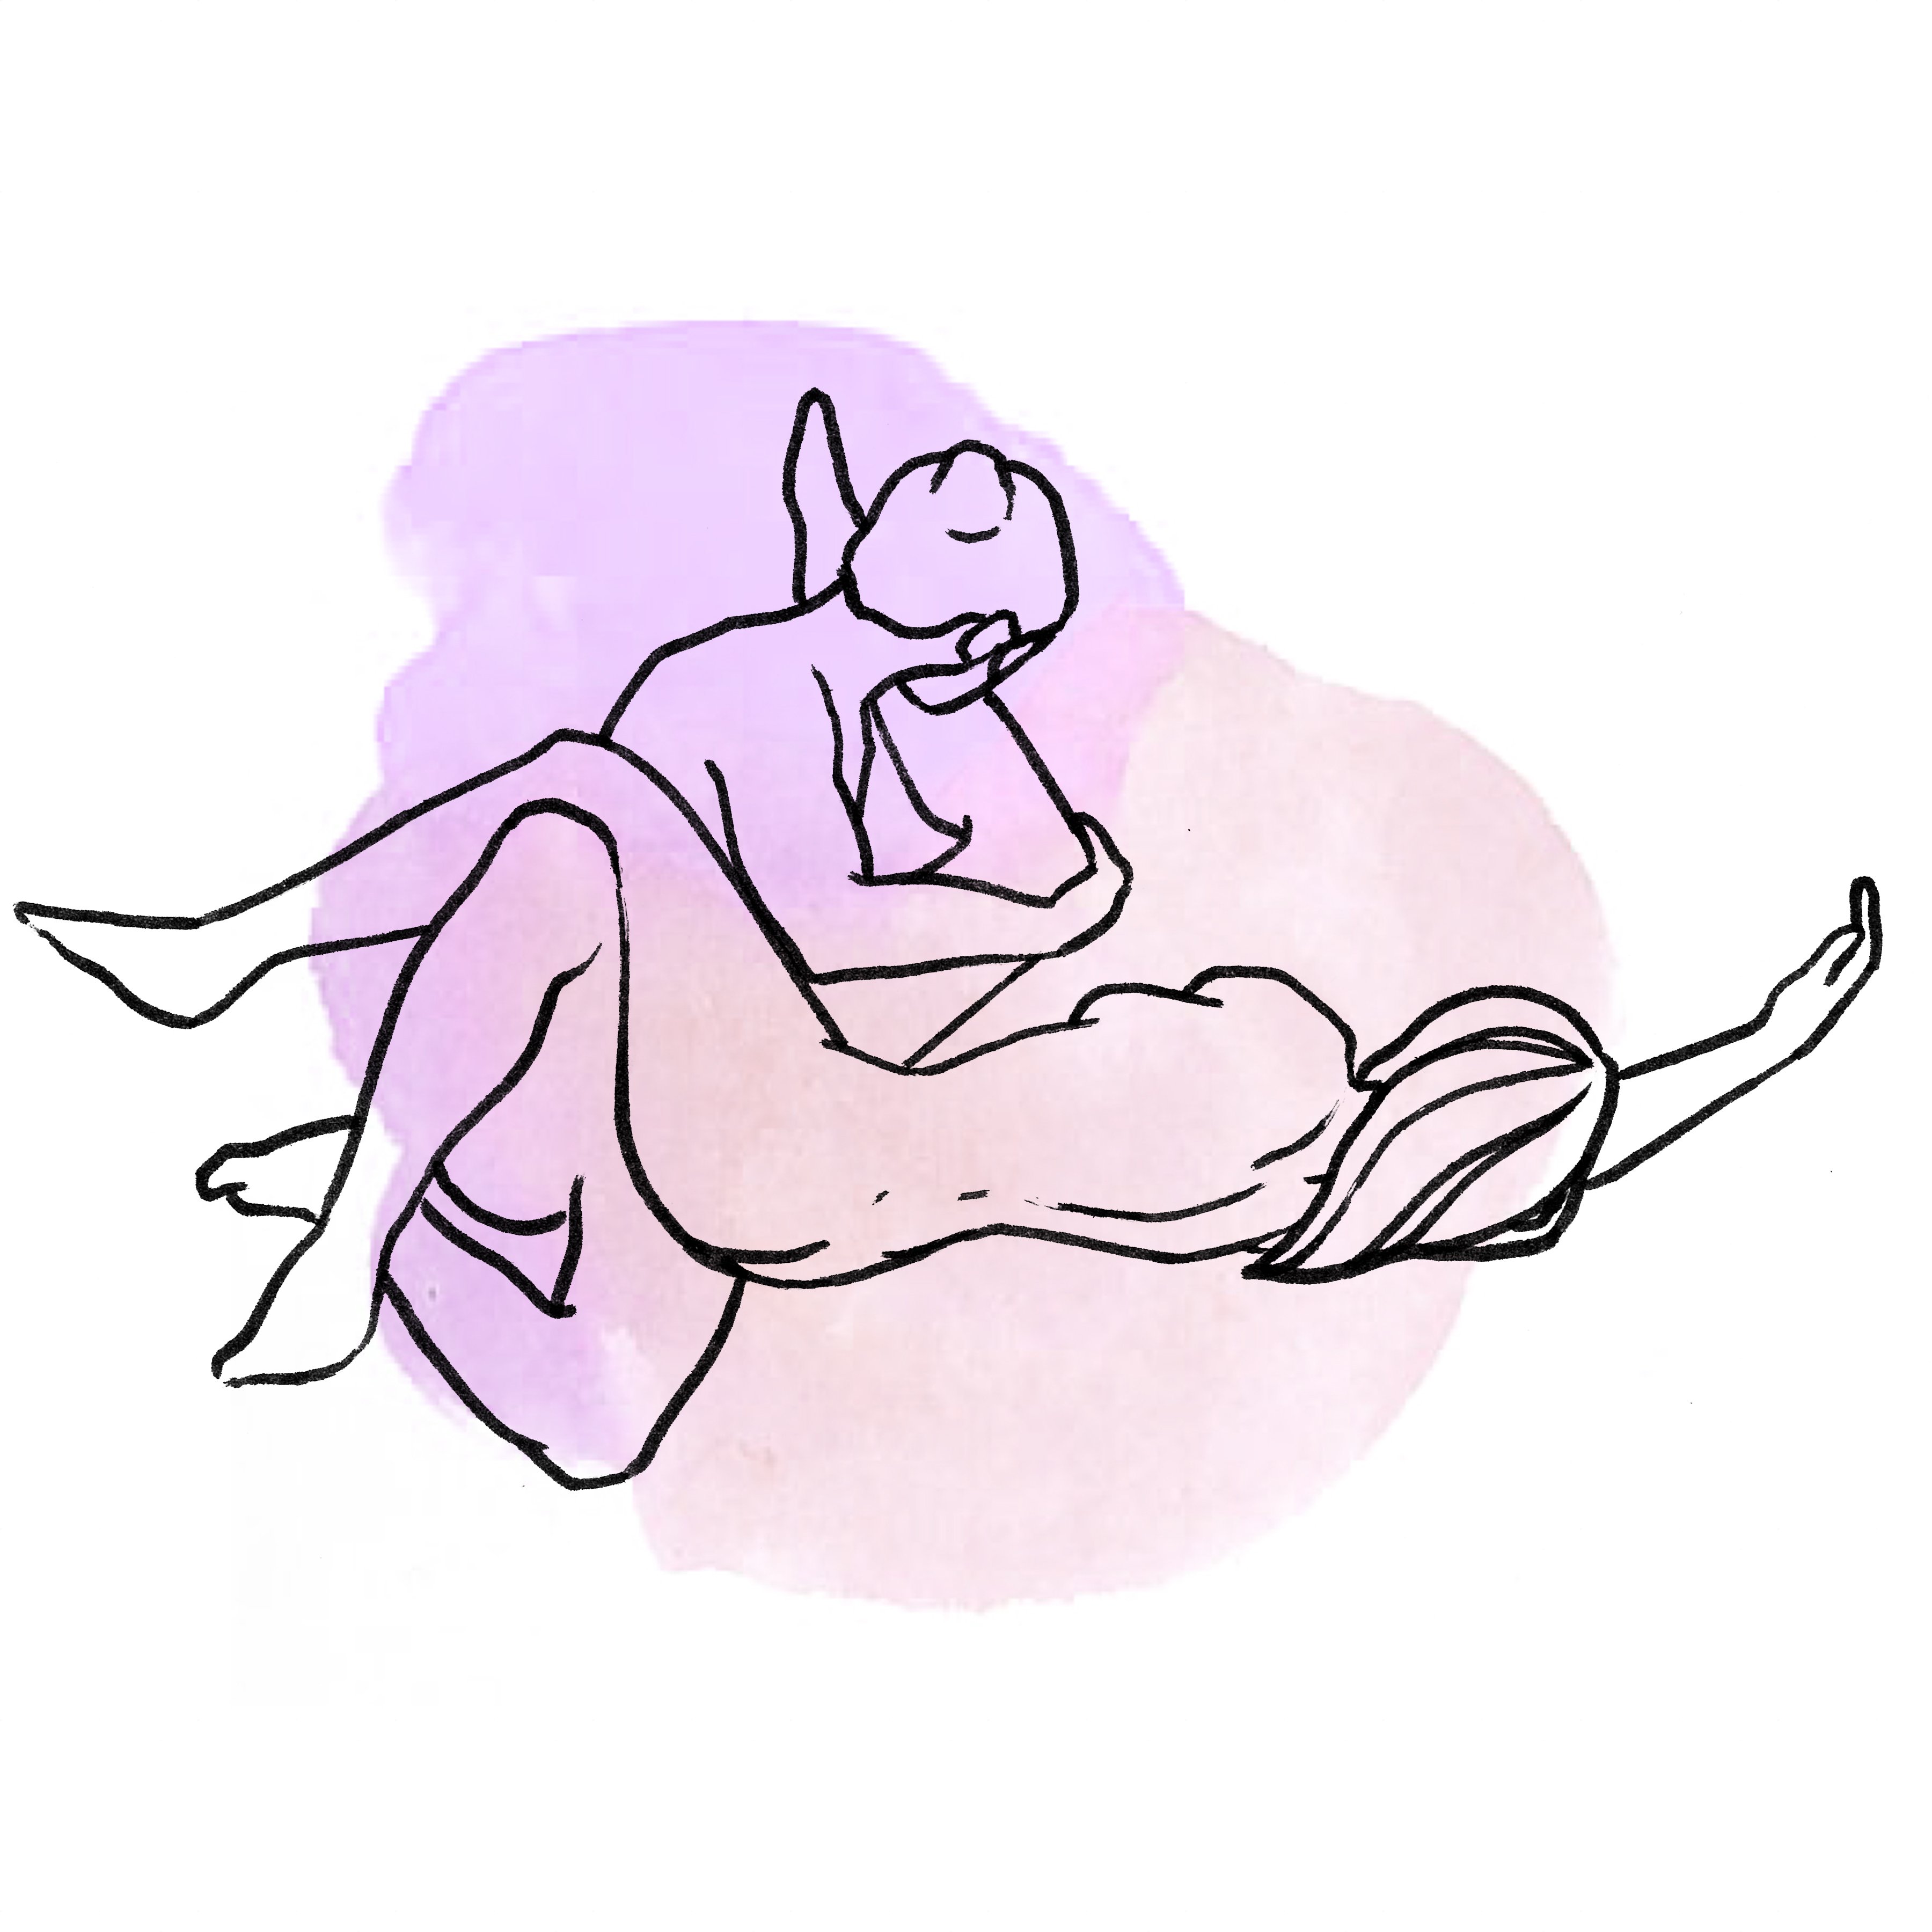 Sex Positions For Orgasm Sketches